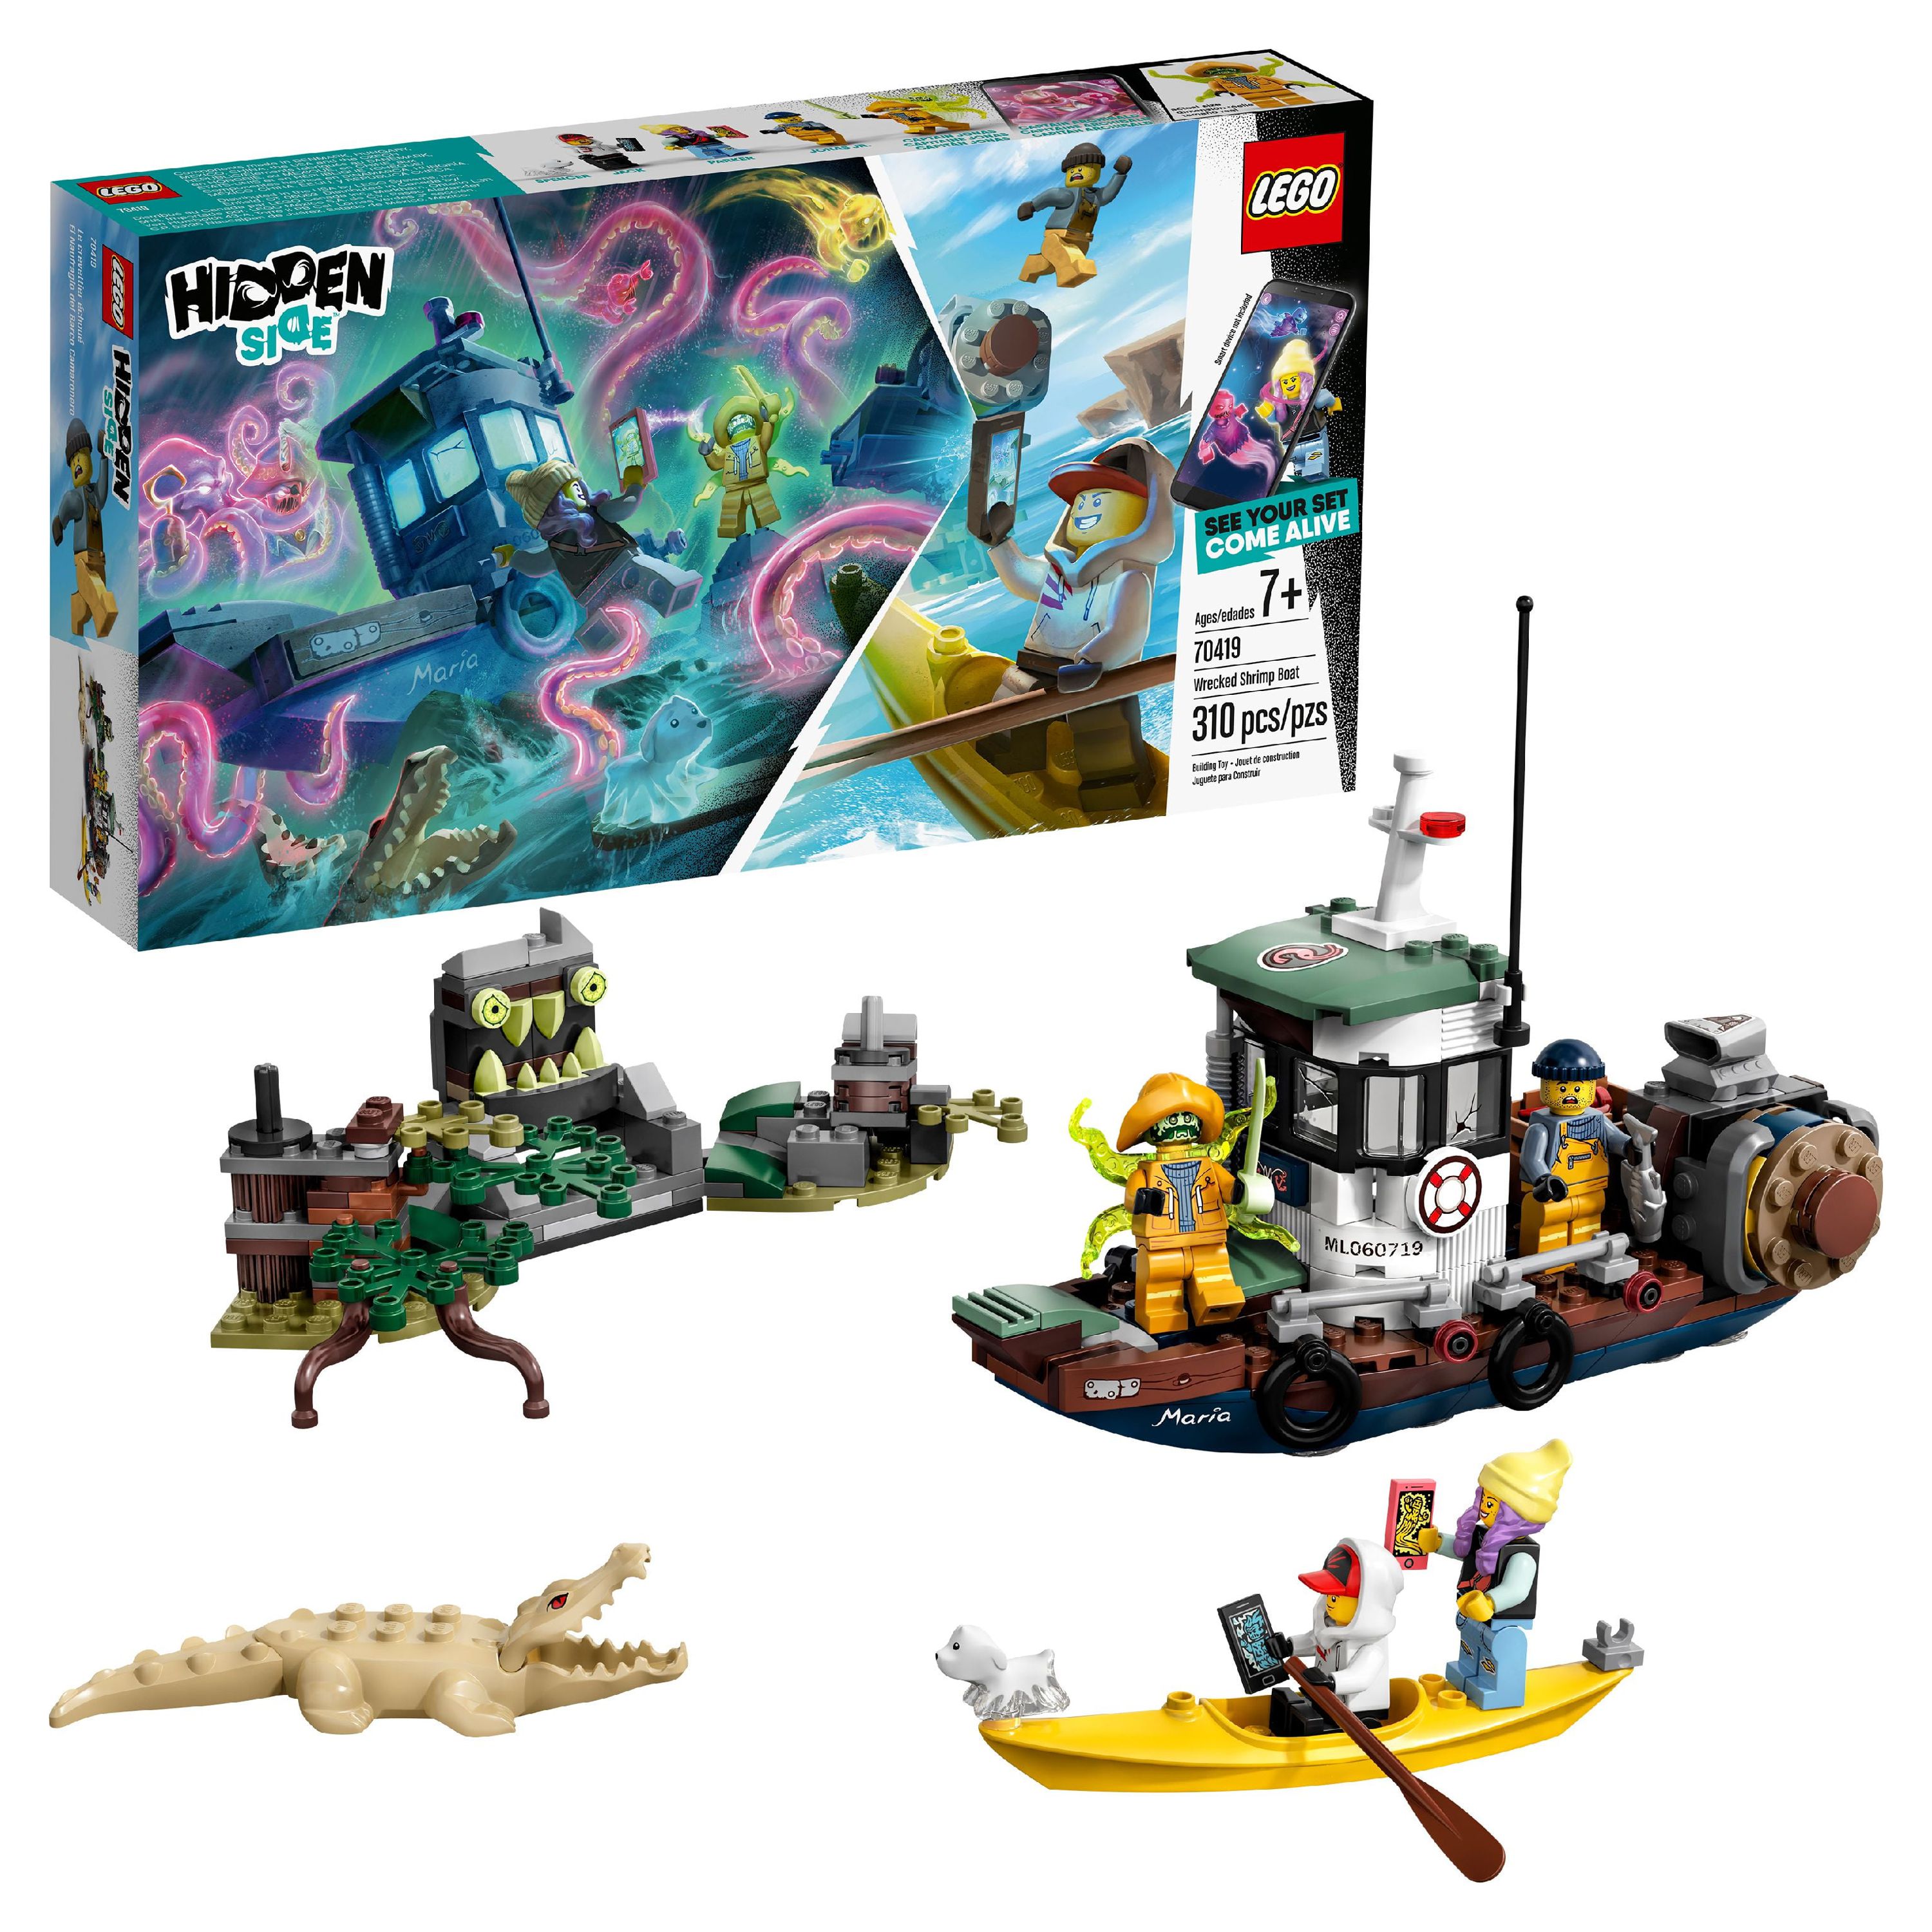 LEGO Hidden Side Augmented Reality (AR) Wrecked Shrimp Boat 70419 (310 Pieces) - image 1 of 8